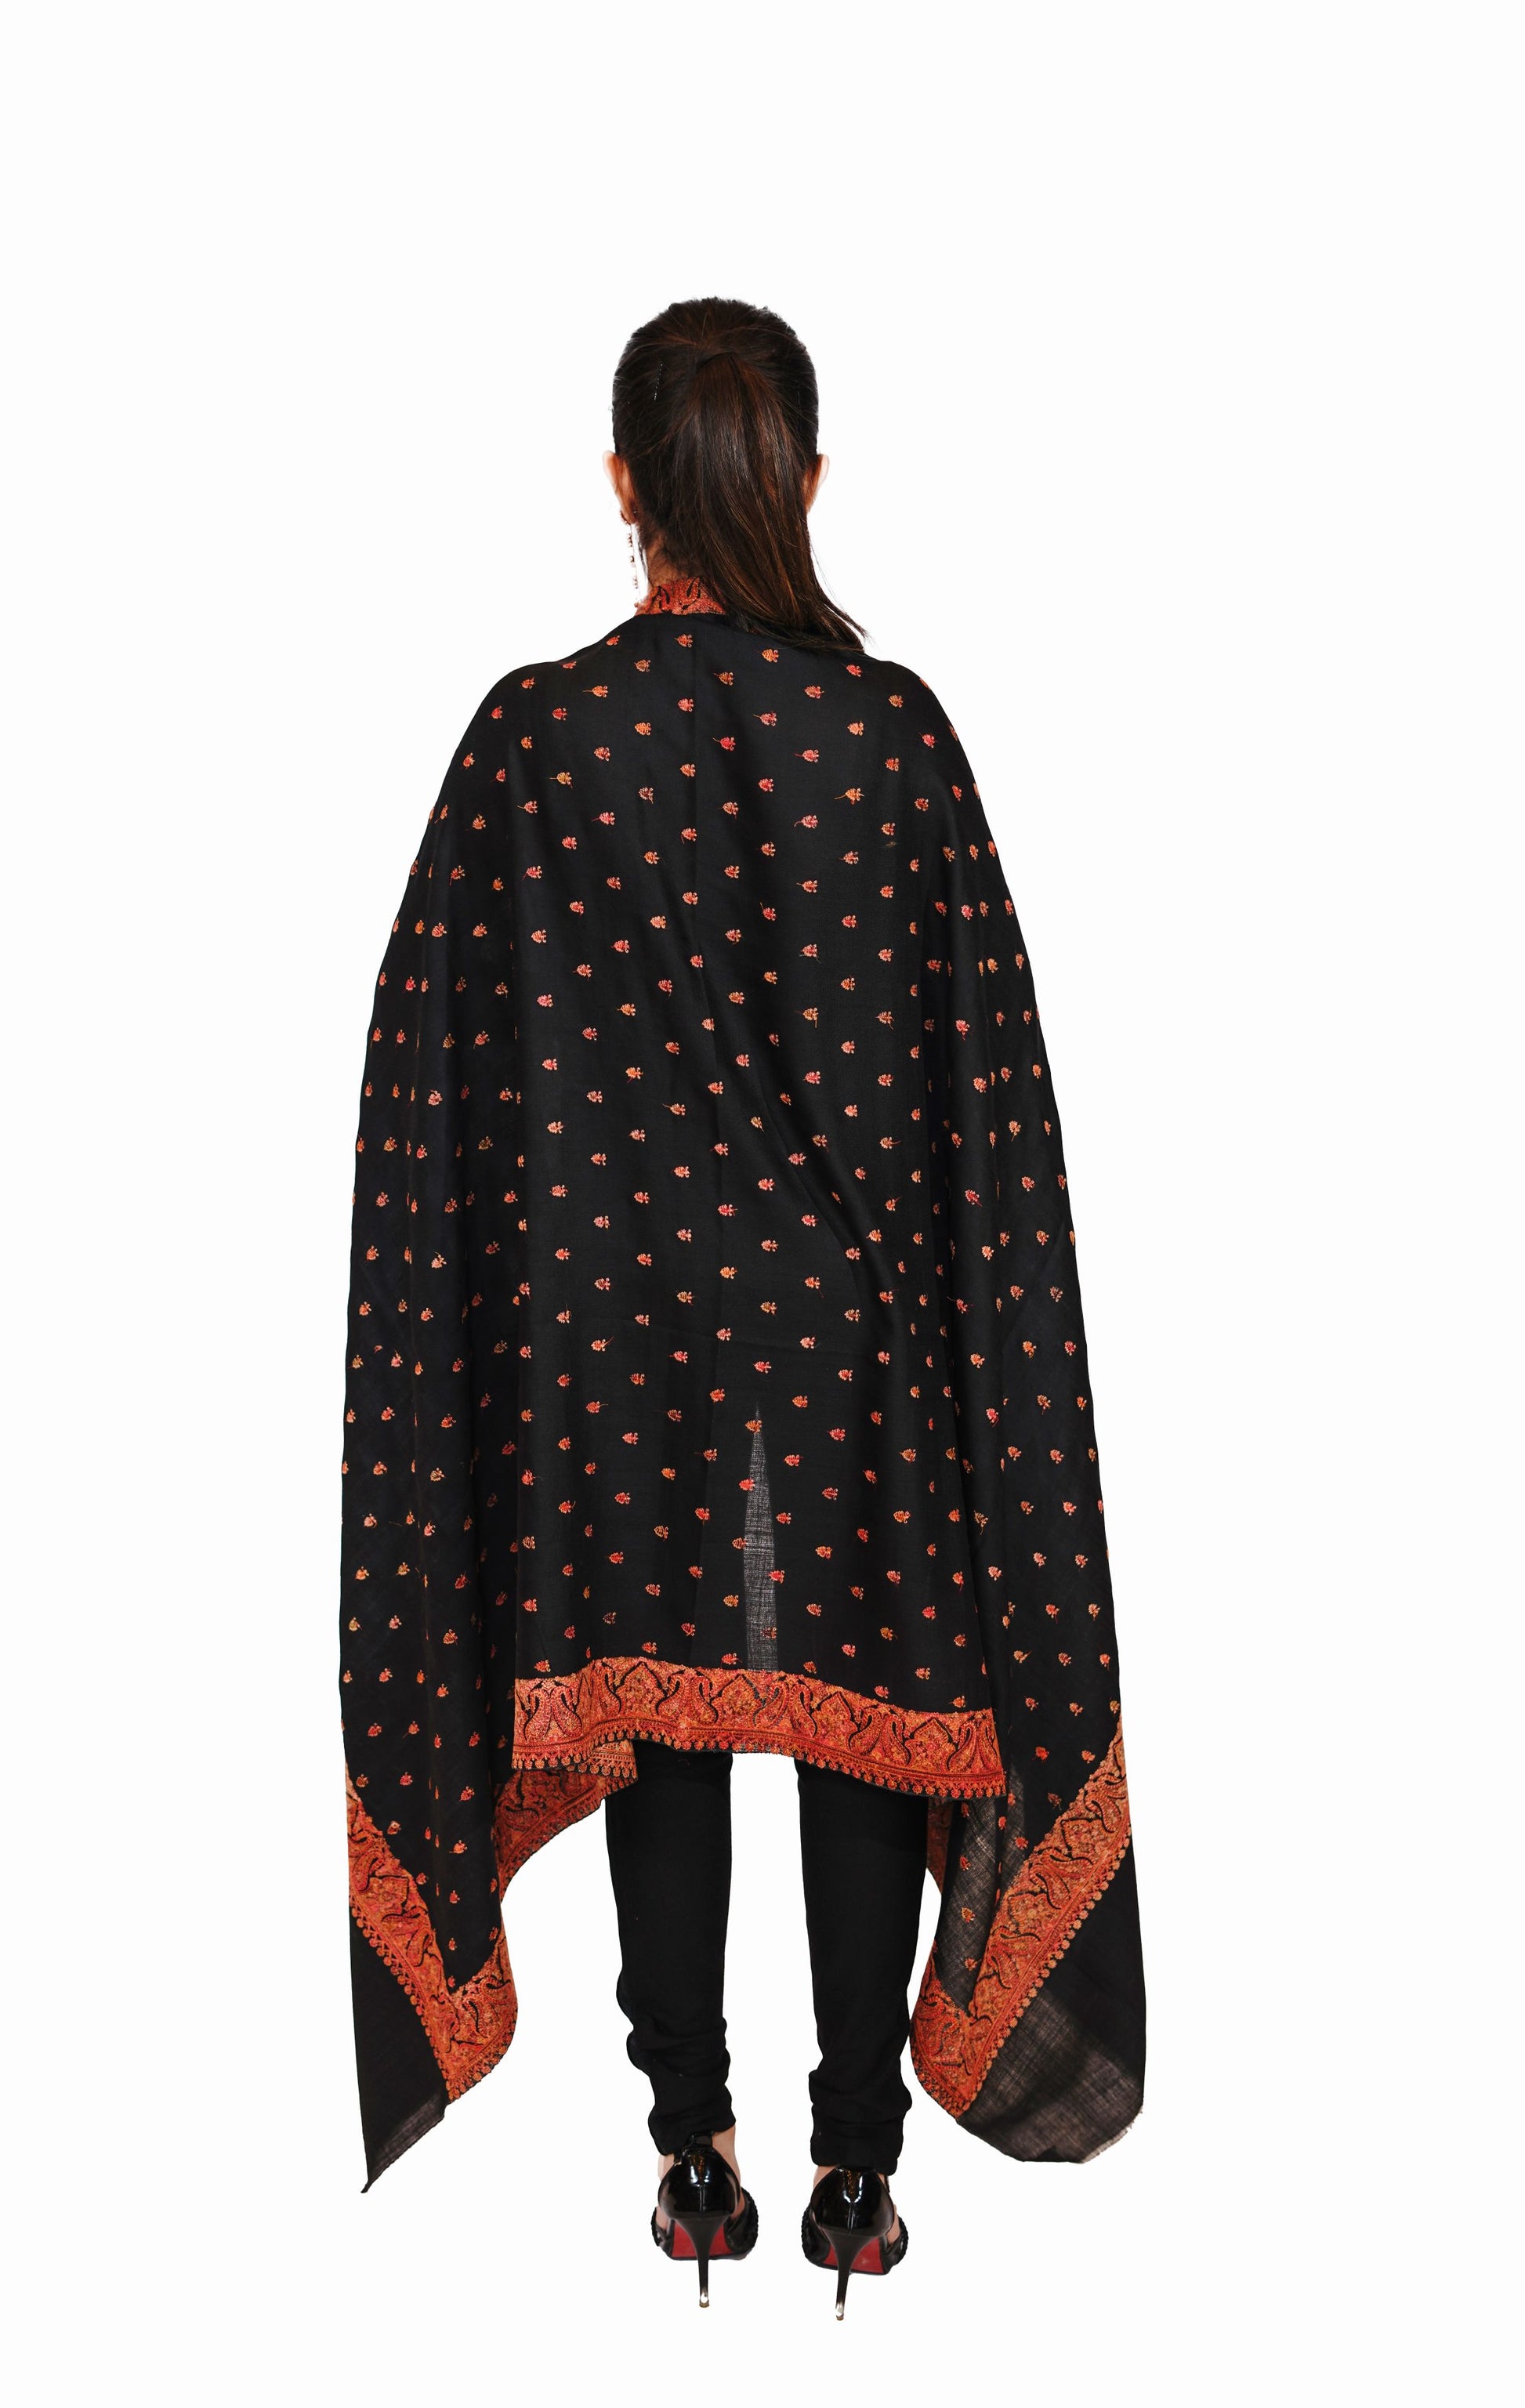 Heritage Booti Embroidered Woollen Shawl for Women